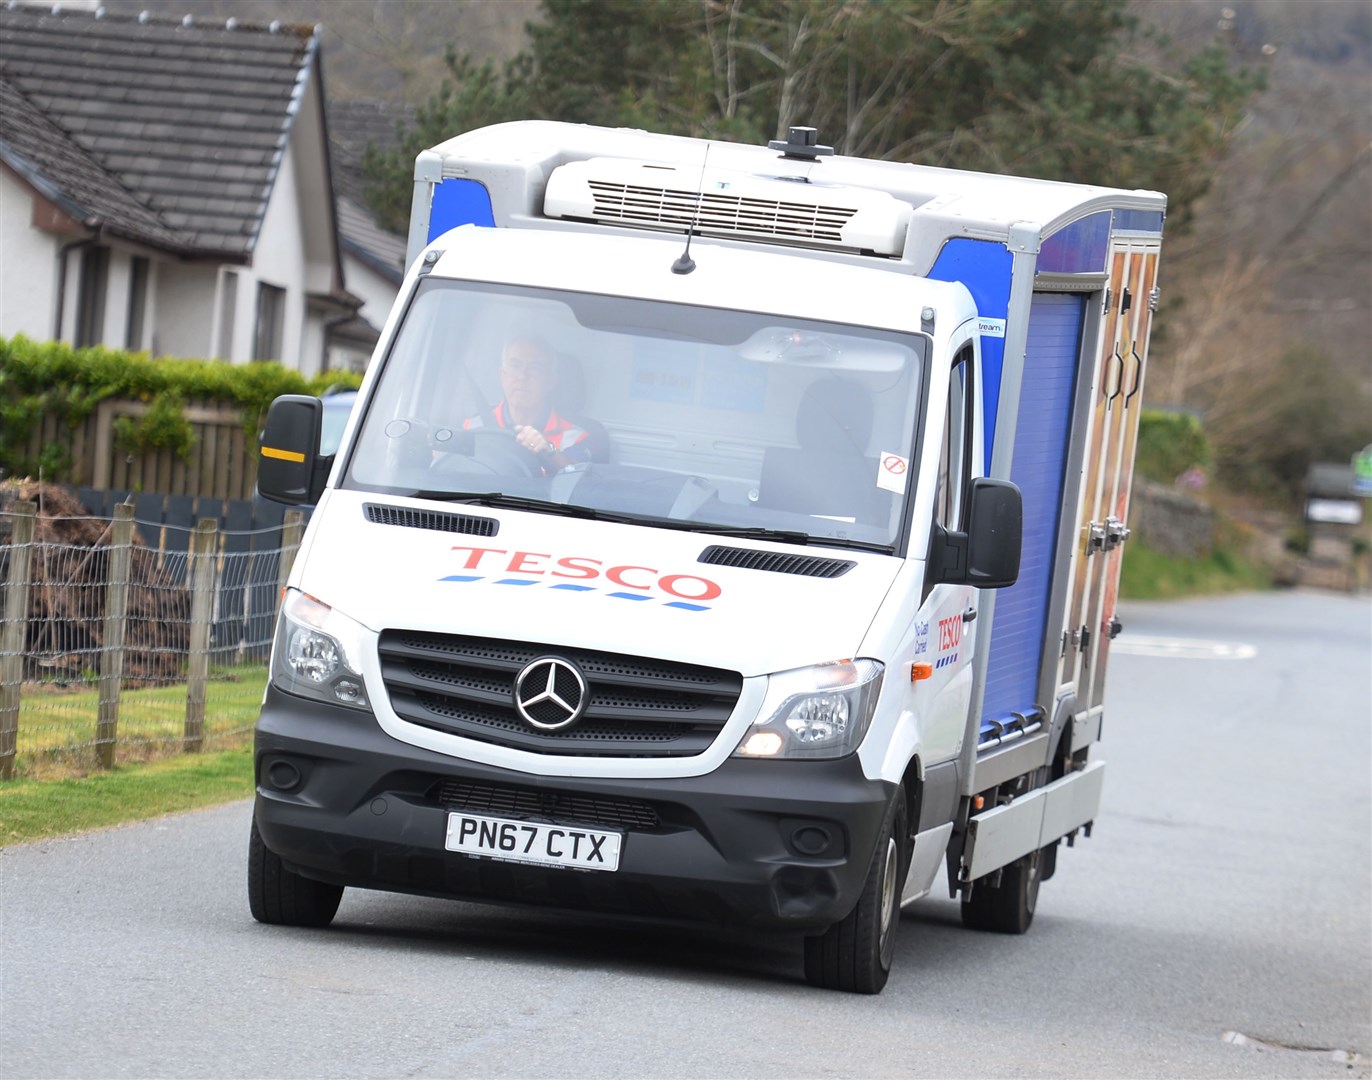 A Tesco delivery van does the rounds.